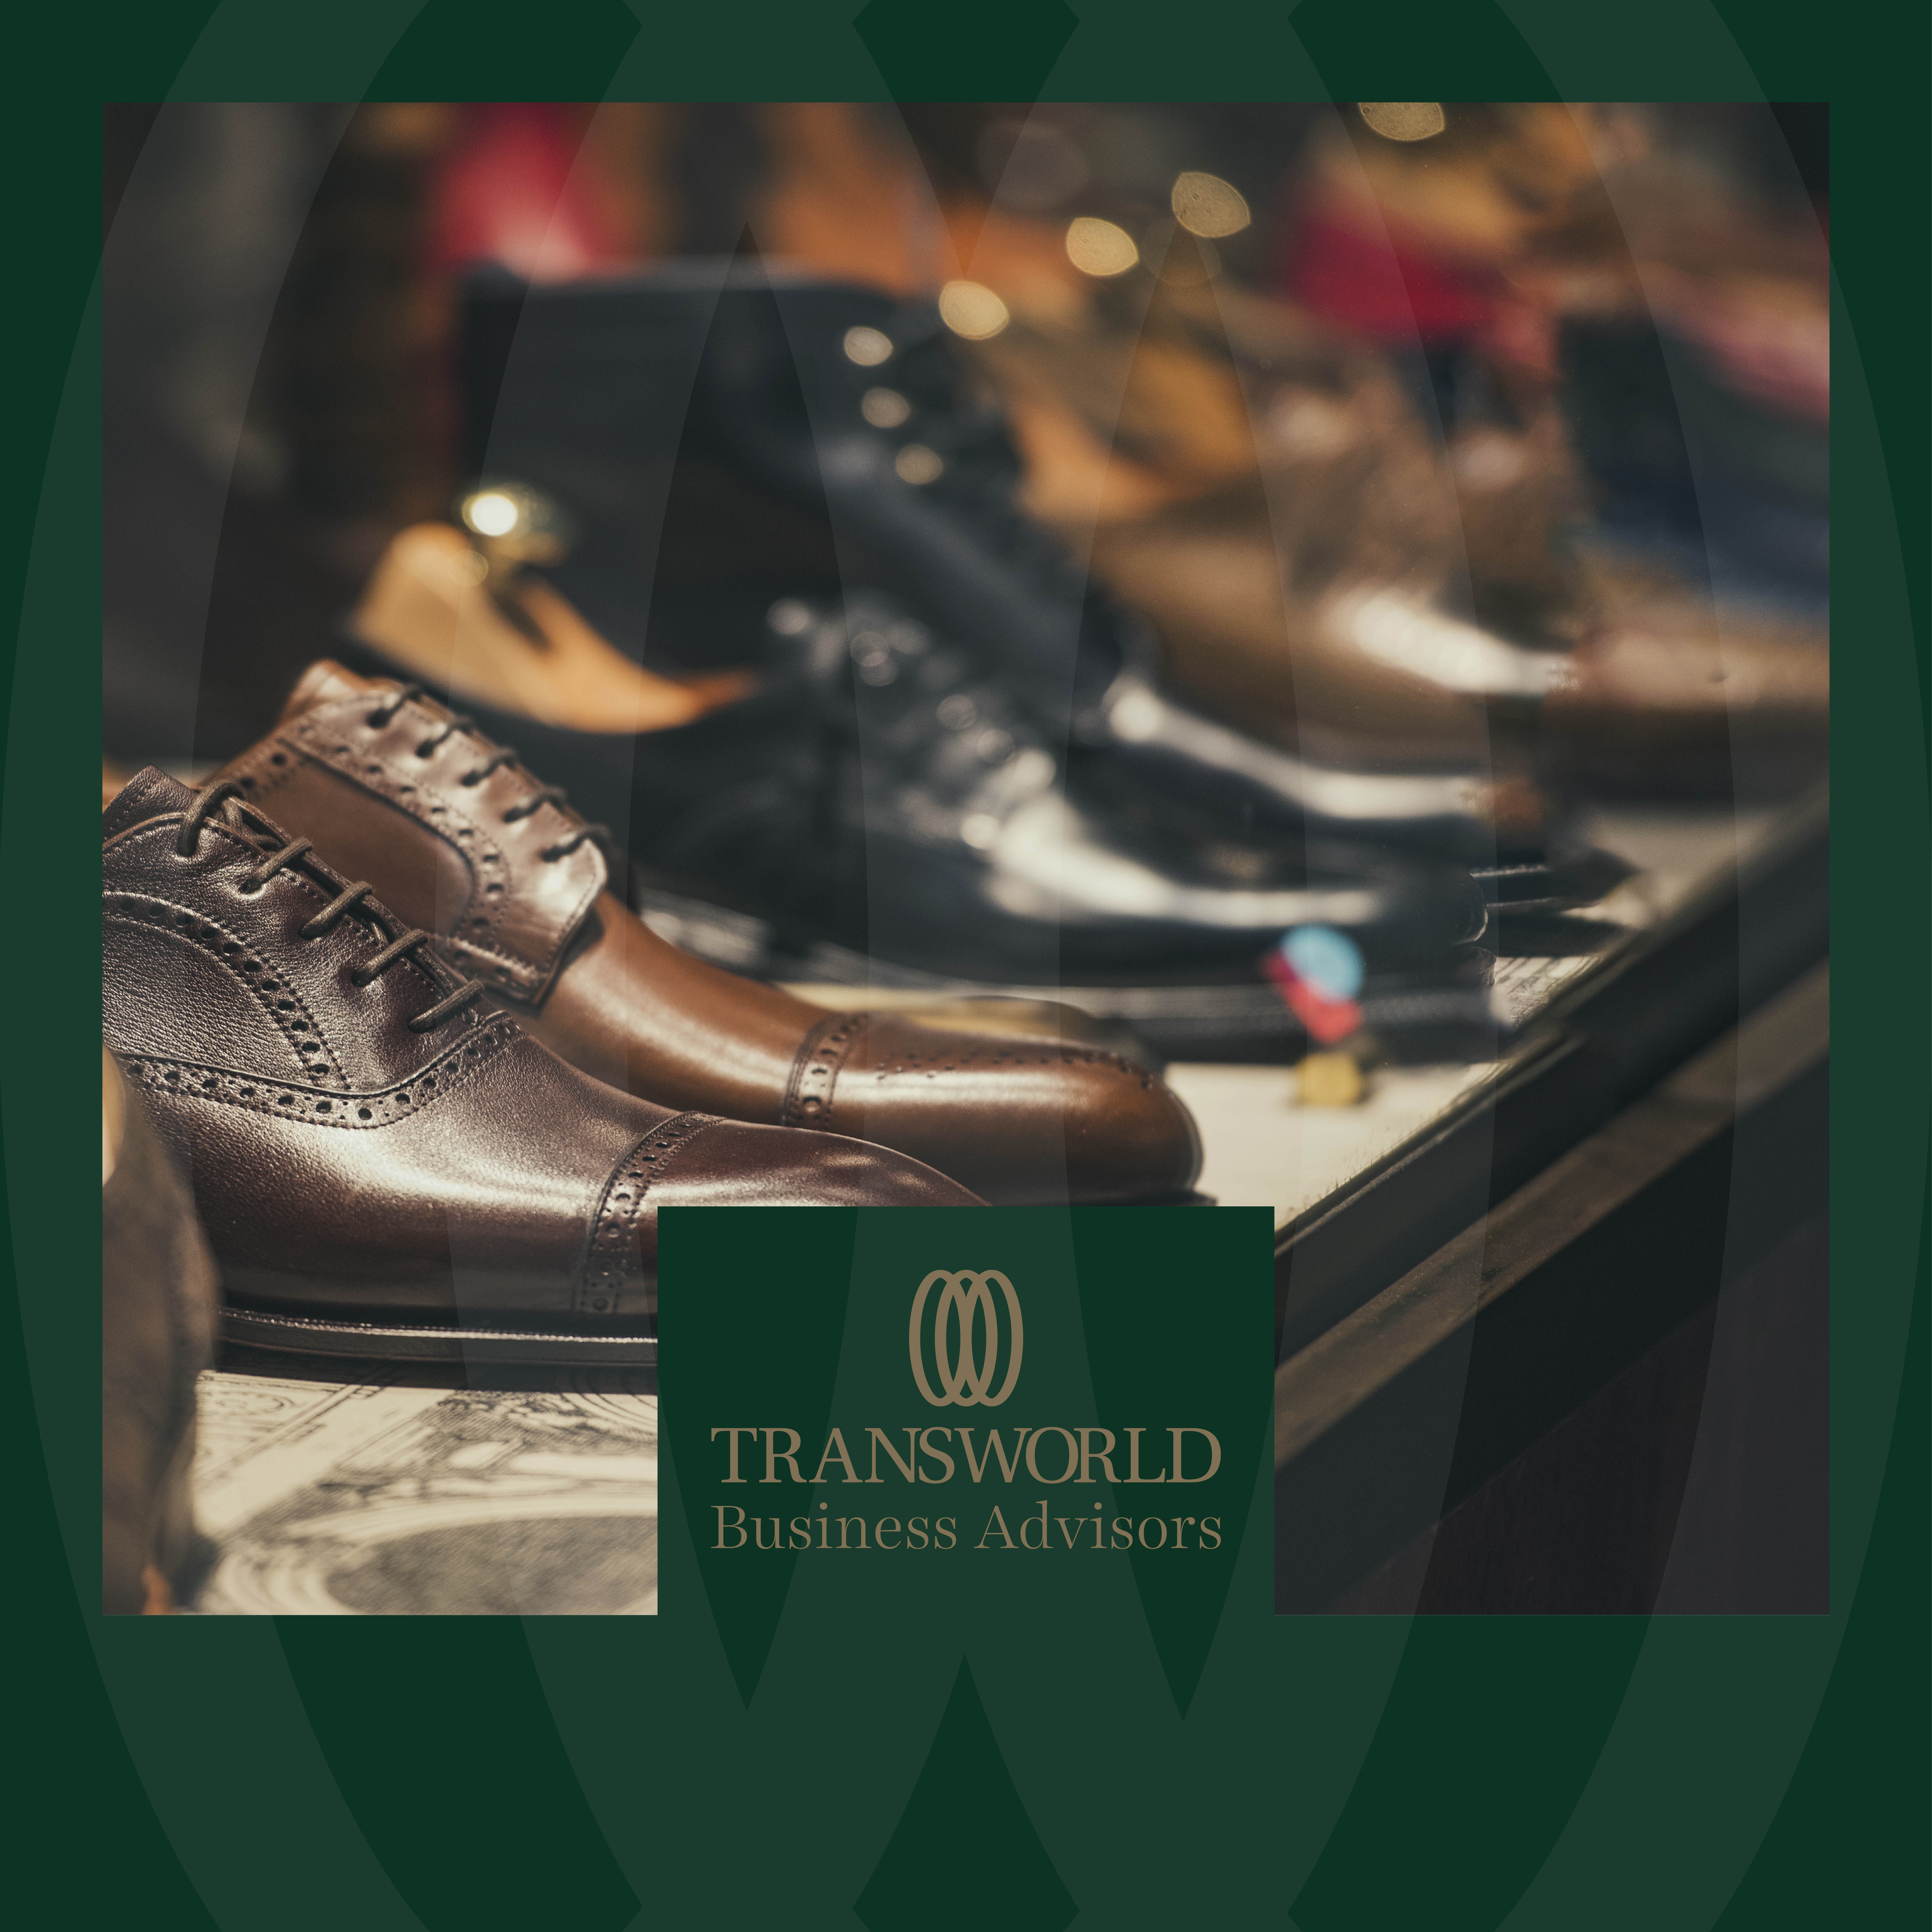 Heritage Footwear and Retail Brands in Existence for Over 100 Years